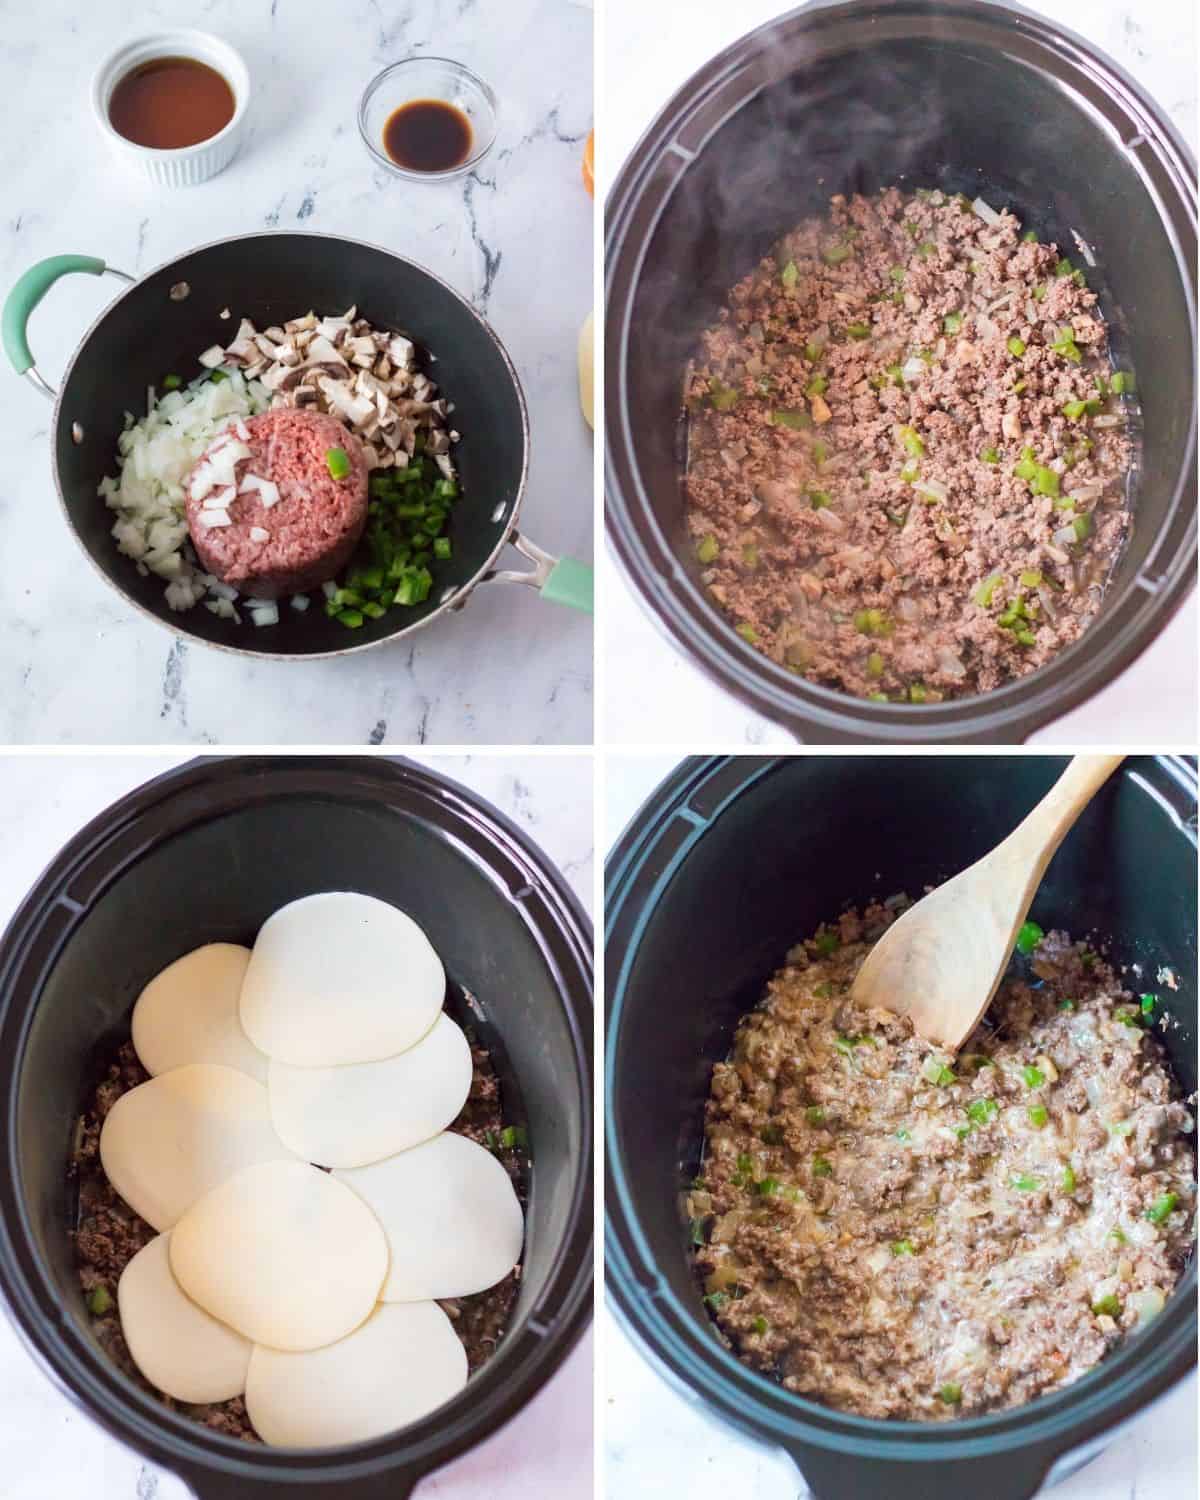 Instructions to make slow cooker or stopvetop philly cheesesteak sloppy joes.